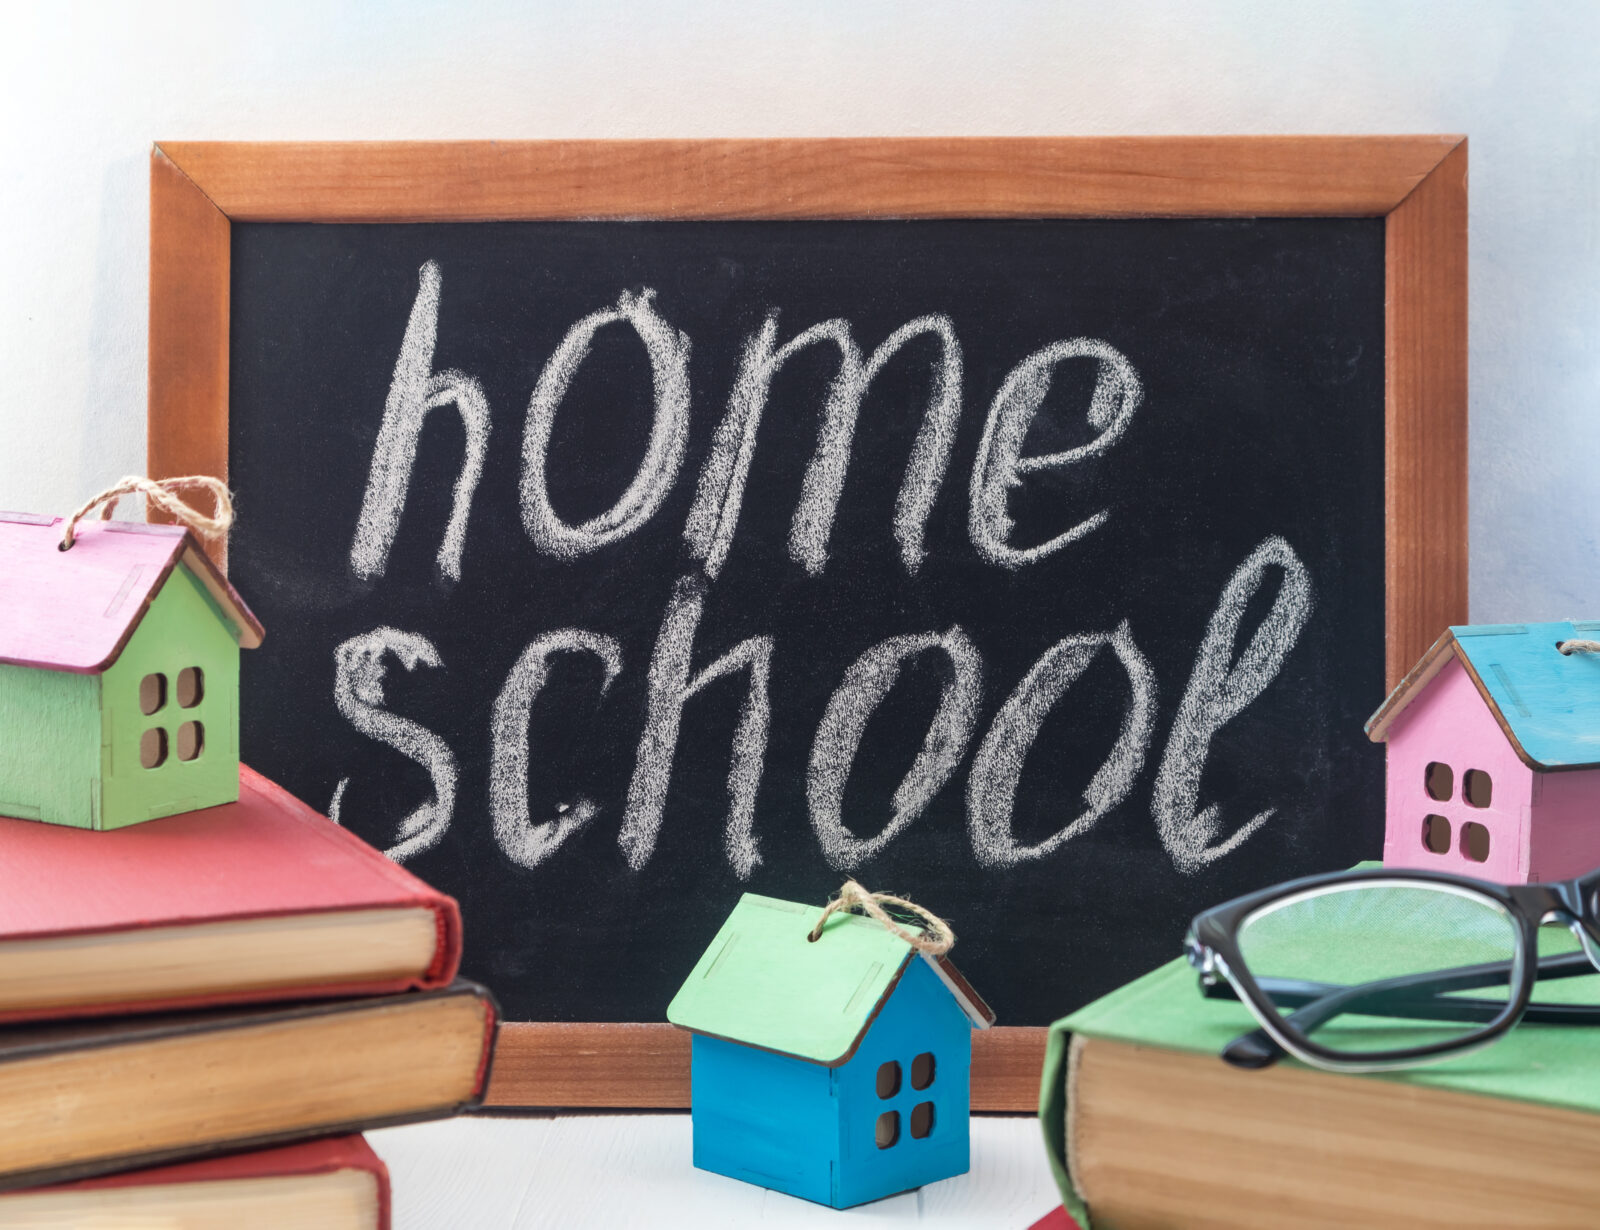 Tabletop chalk board with the word "homeschool" written in white chalk, surrounded by books and colorful wooden house models.